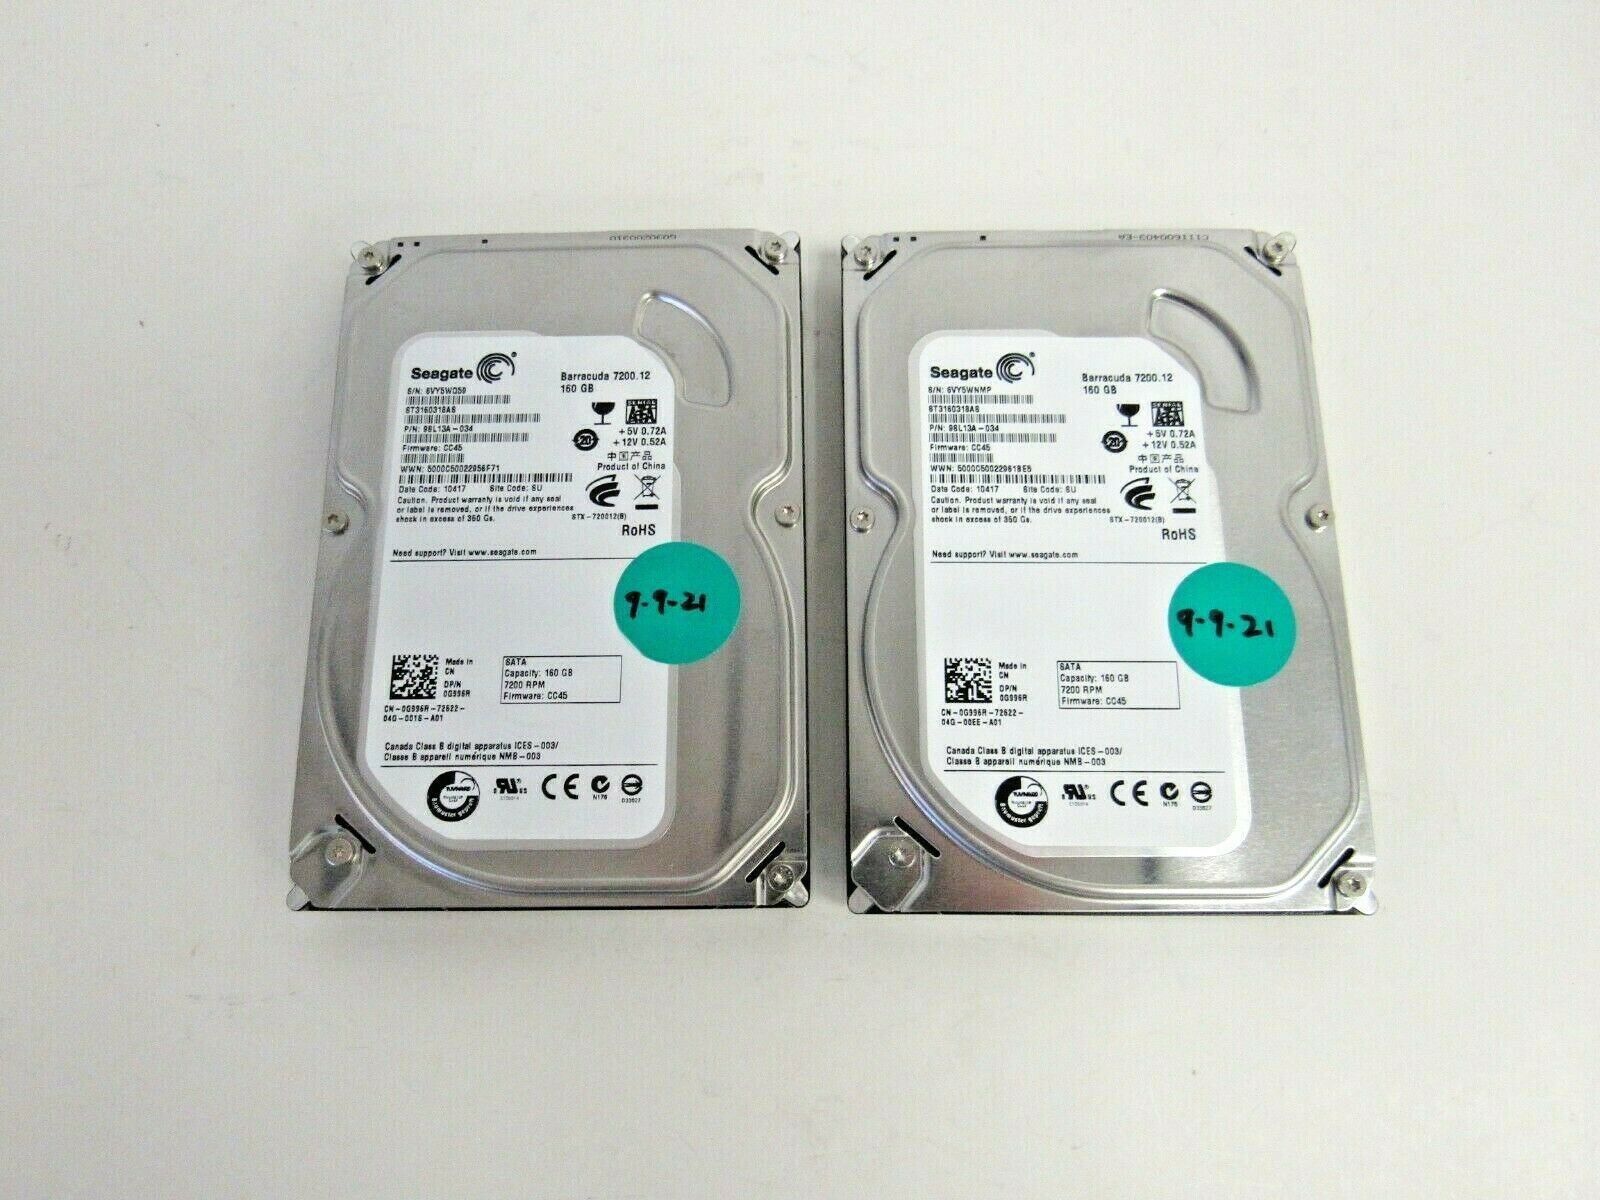 Primary image for Dell Lot of 2 G996R Seagate ST3160318AS 9SL13A-034 160GB SATA 8MB 3.5" HDD 39-3